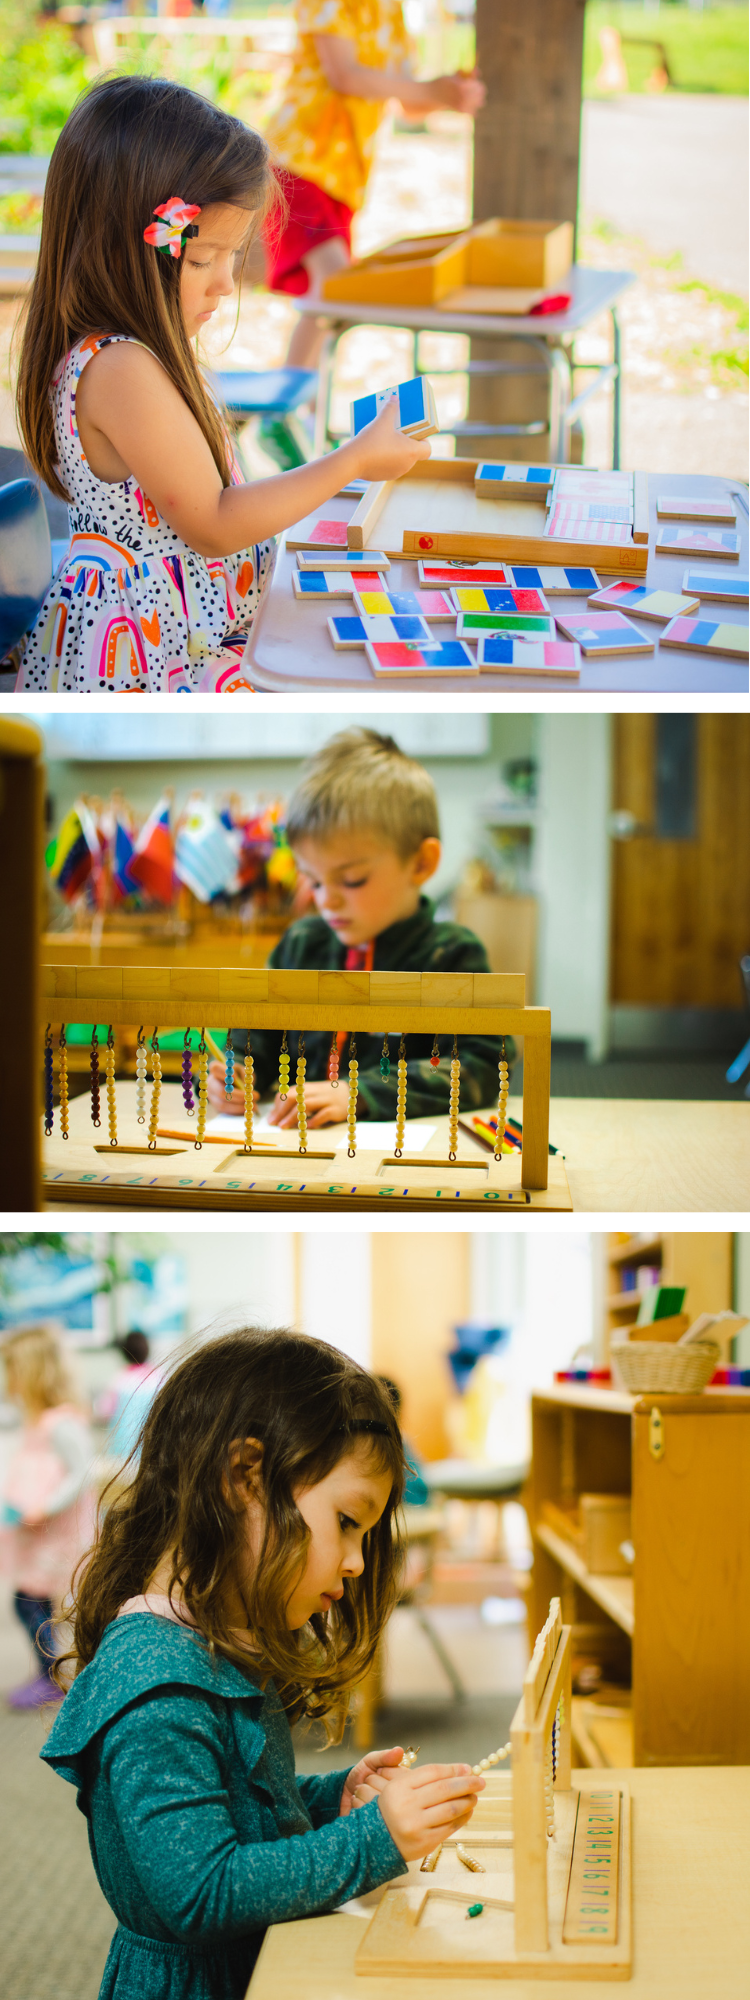 This section has three images. First, a child is matching different world flags while sitting at a desk in the outdoor classroom space. It's a very sunny day and the child has a flower clip in their hair while wearing a white dress with black polka dots and different rainbow patterns. Second, the camera is focused on math hanging beads and writing down what the beads represent. Last is another student using math beads but has just begun counting from 1 to 10.